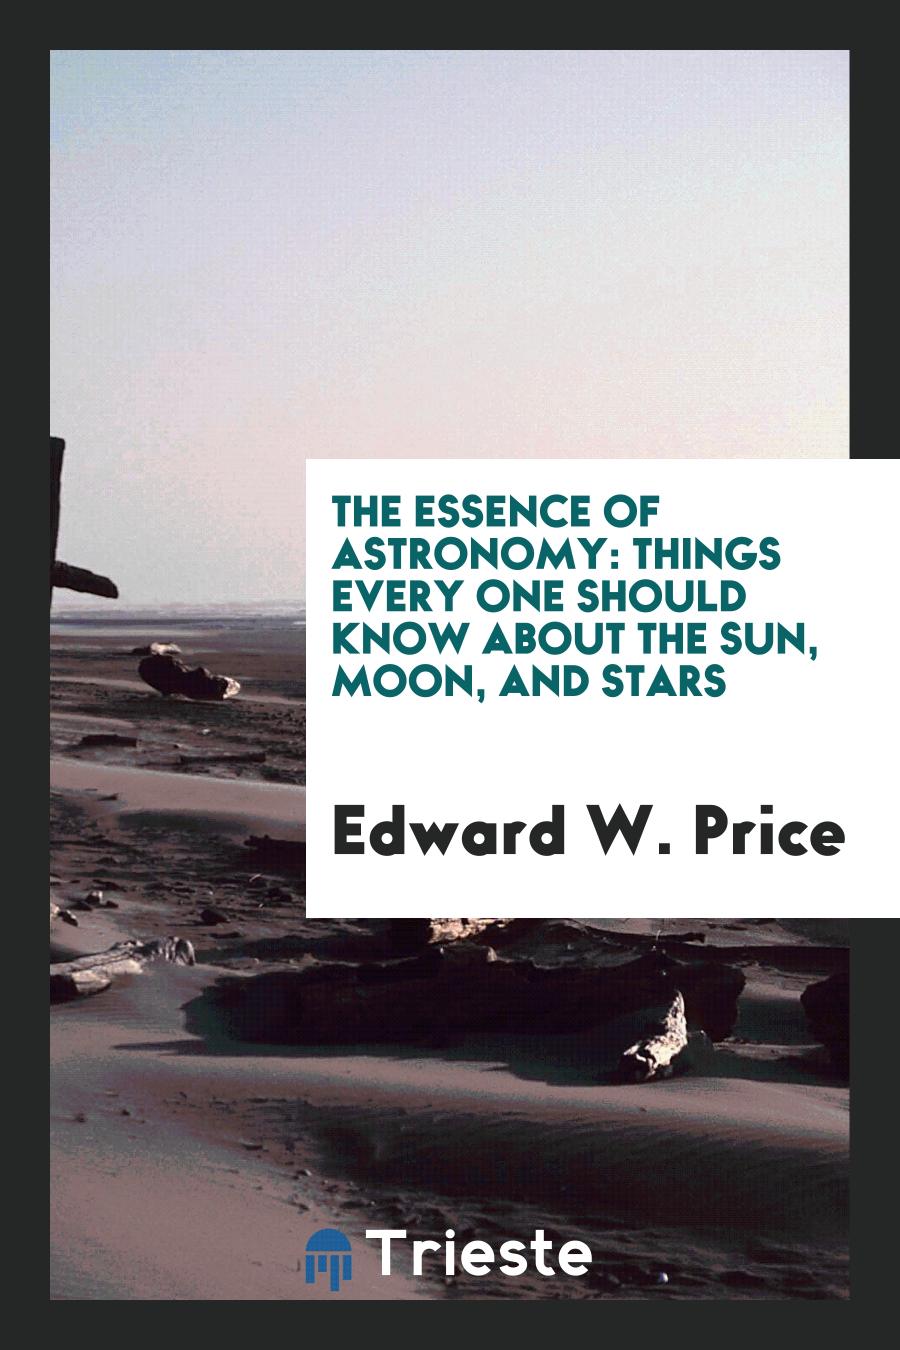 Edward W. Price - The Essence of Astronomy: Things Every One Should Know About the Sun, Moon, and Stars